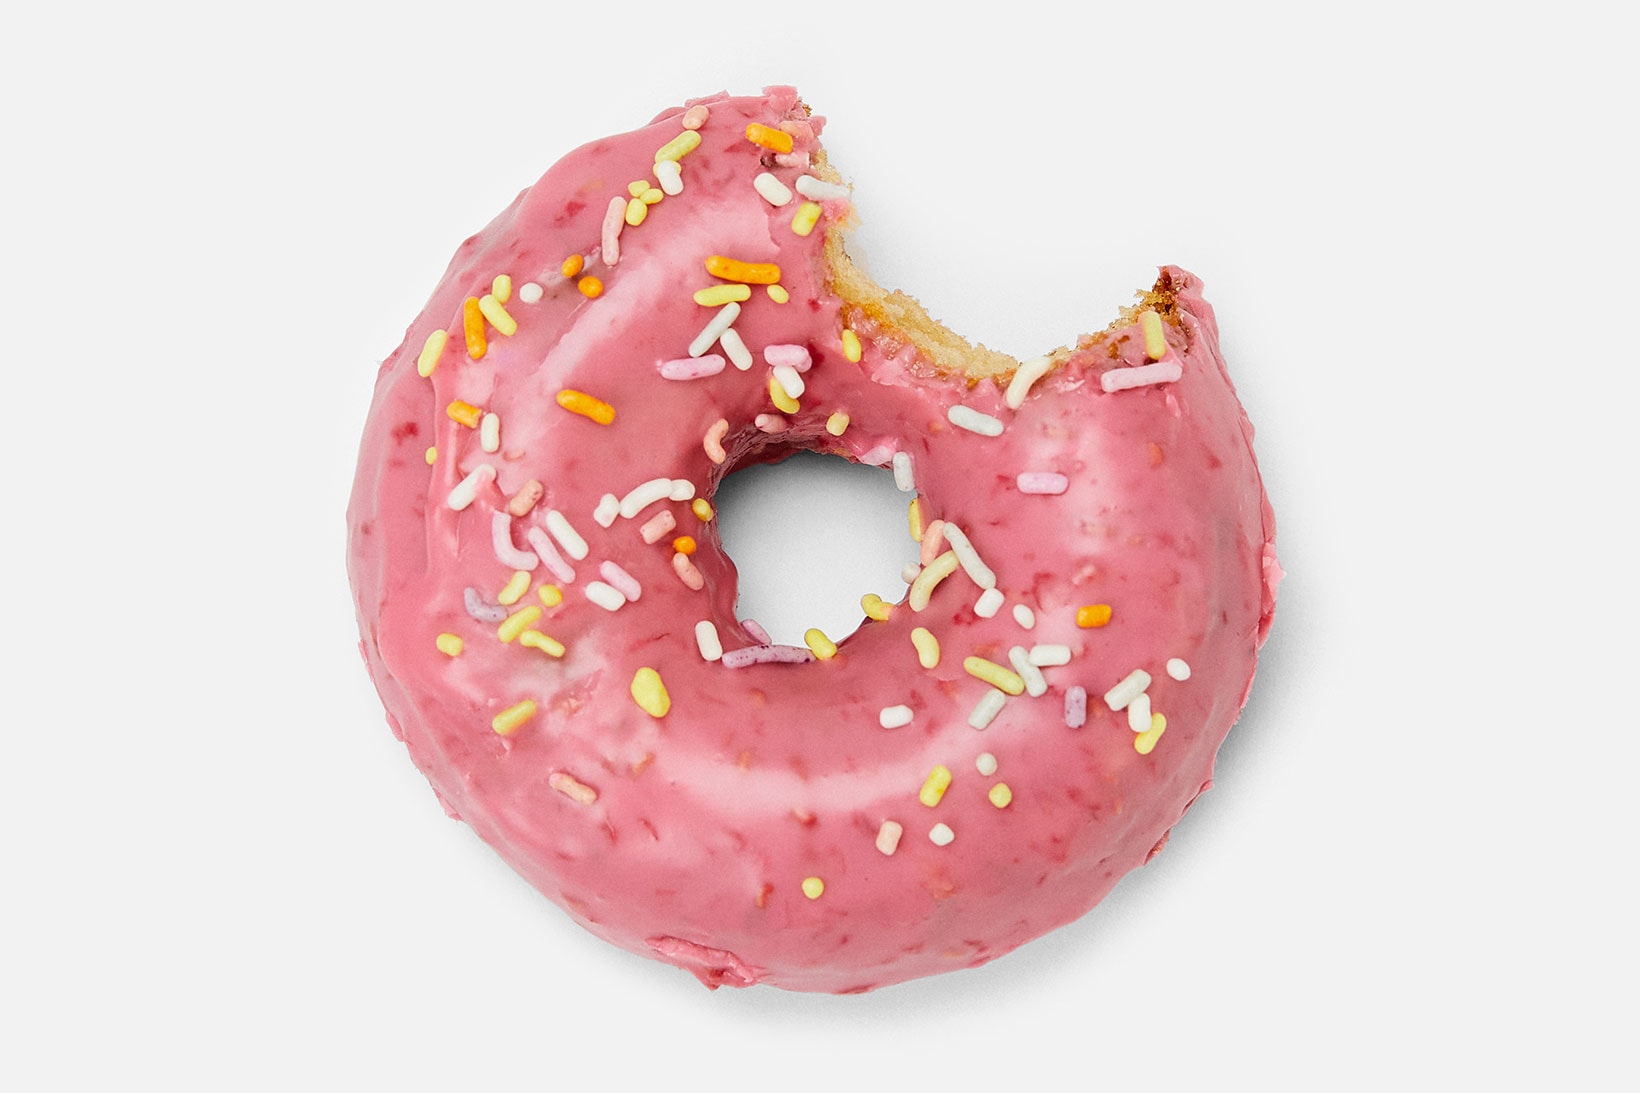 the simpsons kith collaboration pink donuts treats sweets dessert snacks